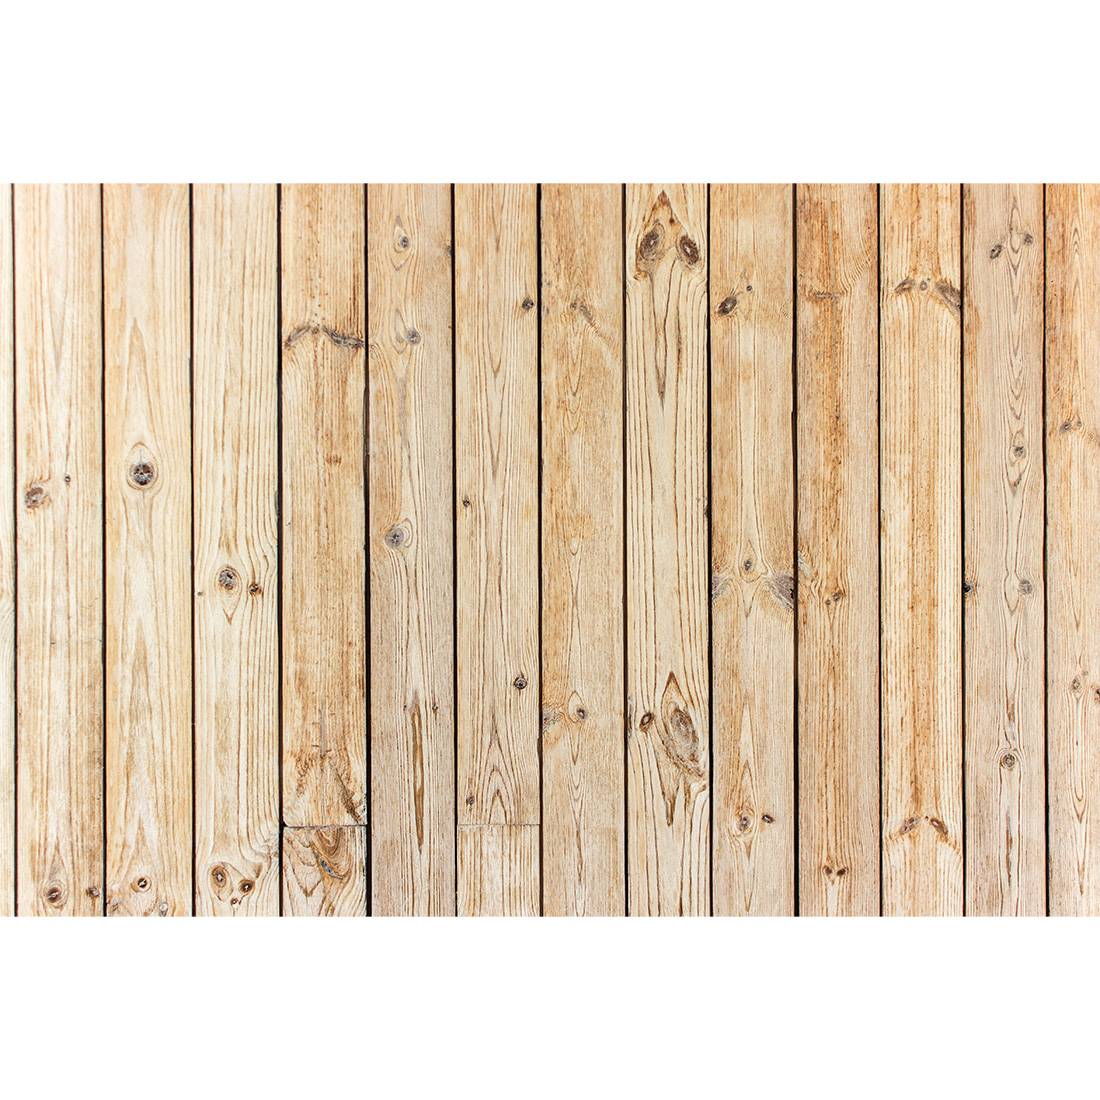 wood plank wall for texture or background5 824